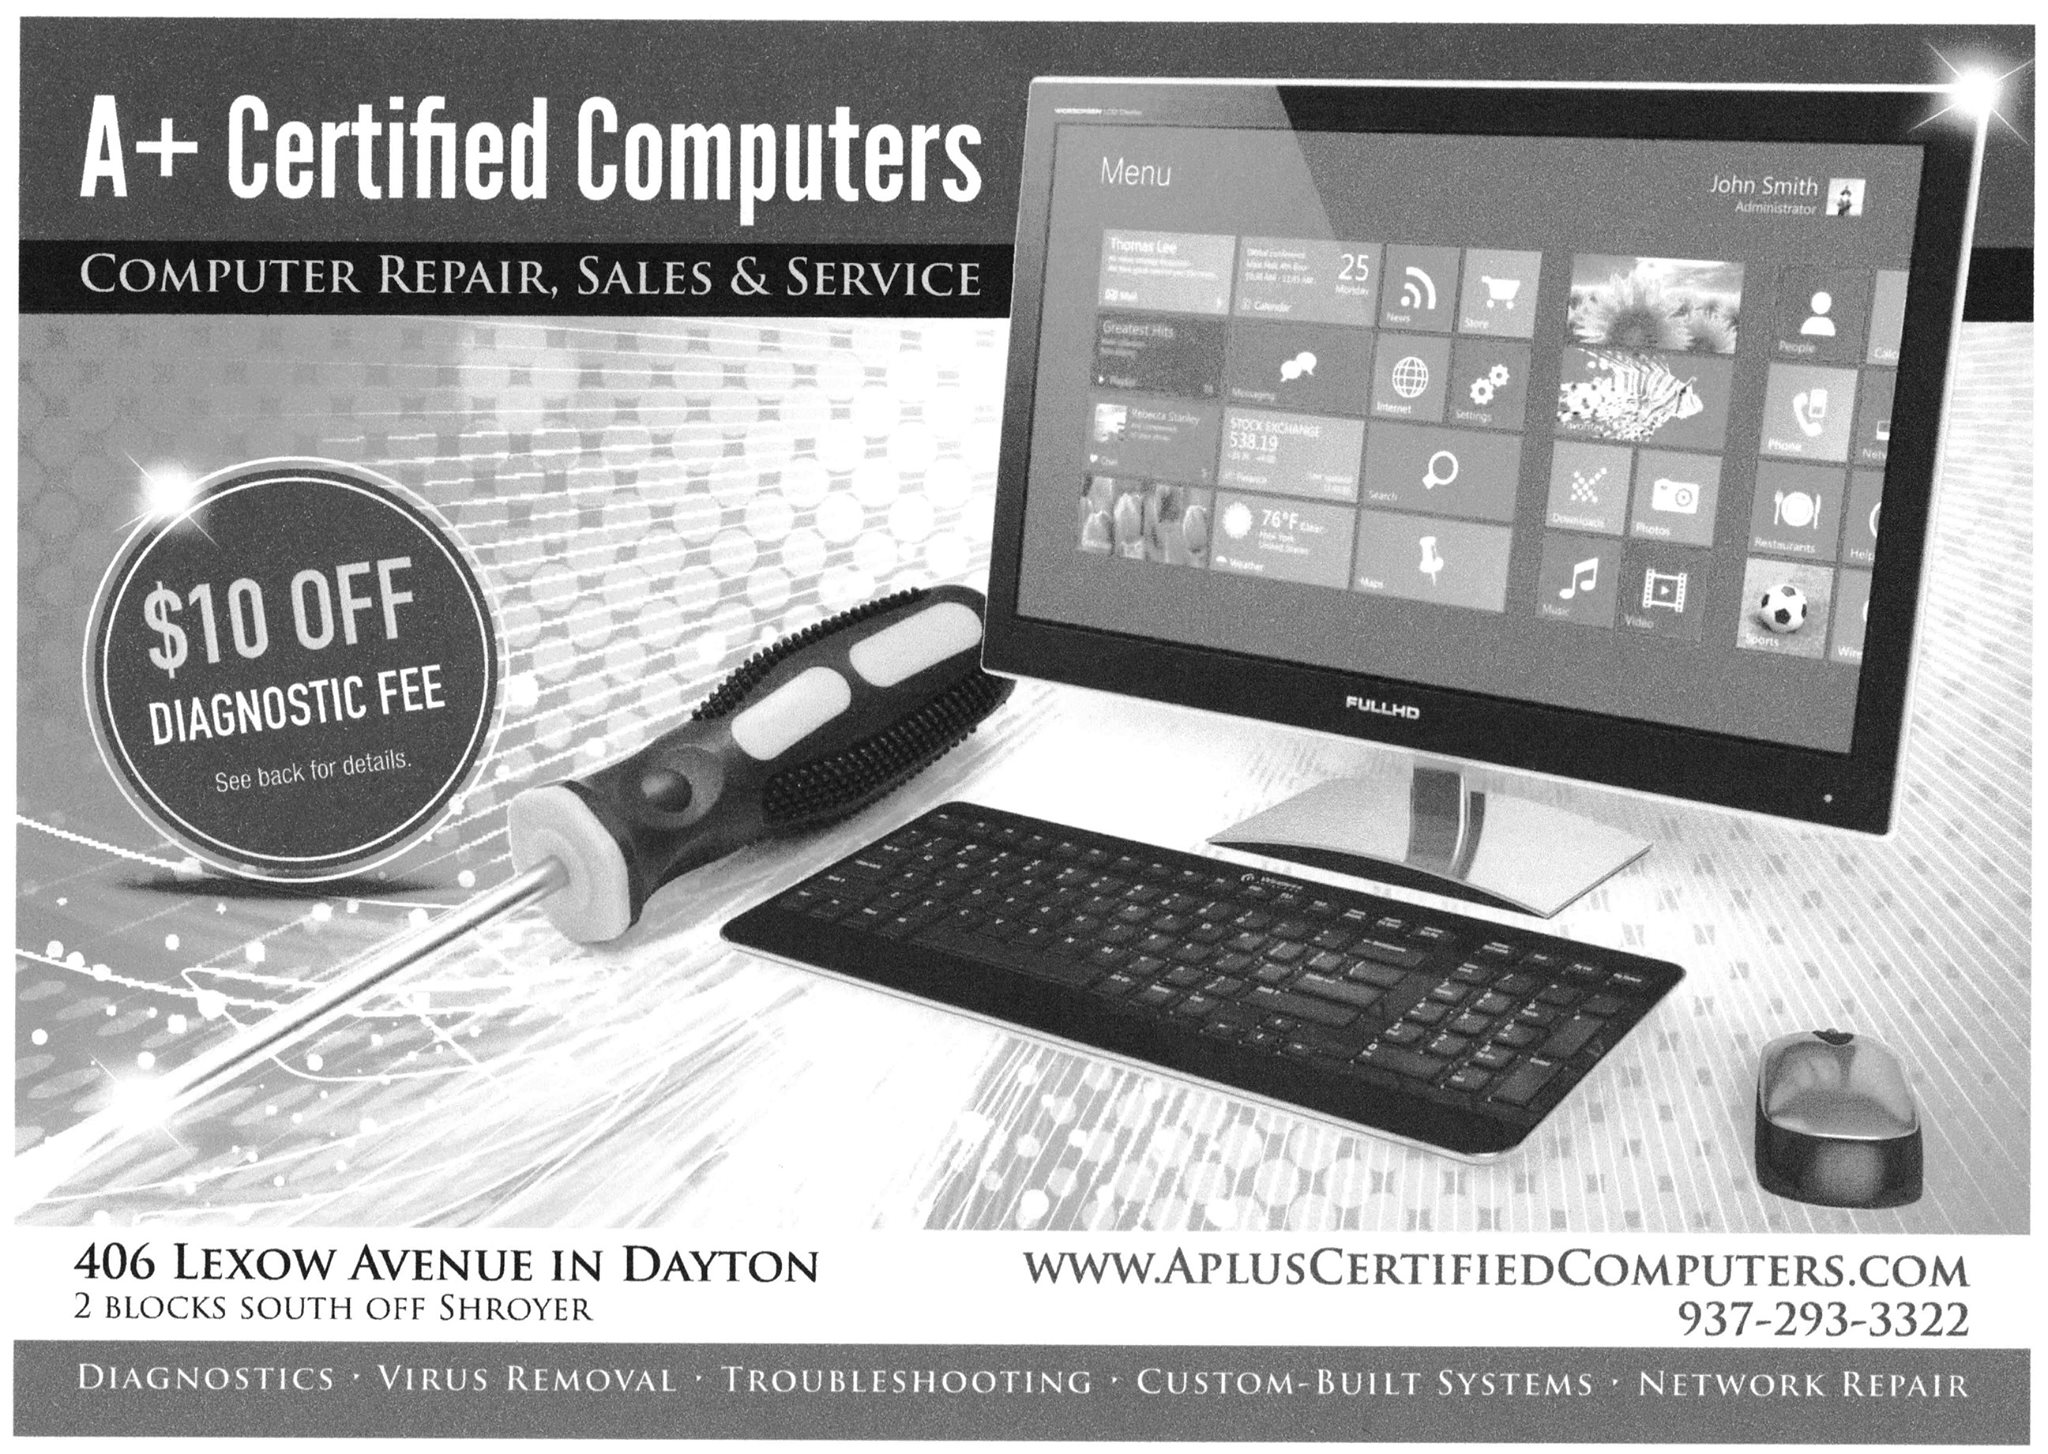 A Plus Certified Computers